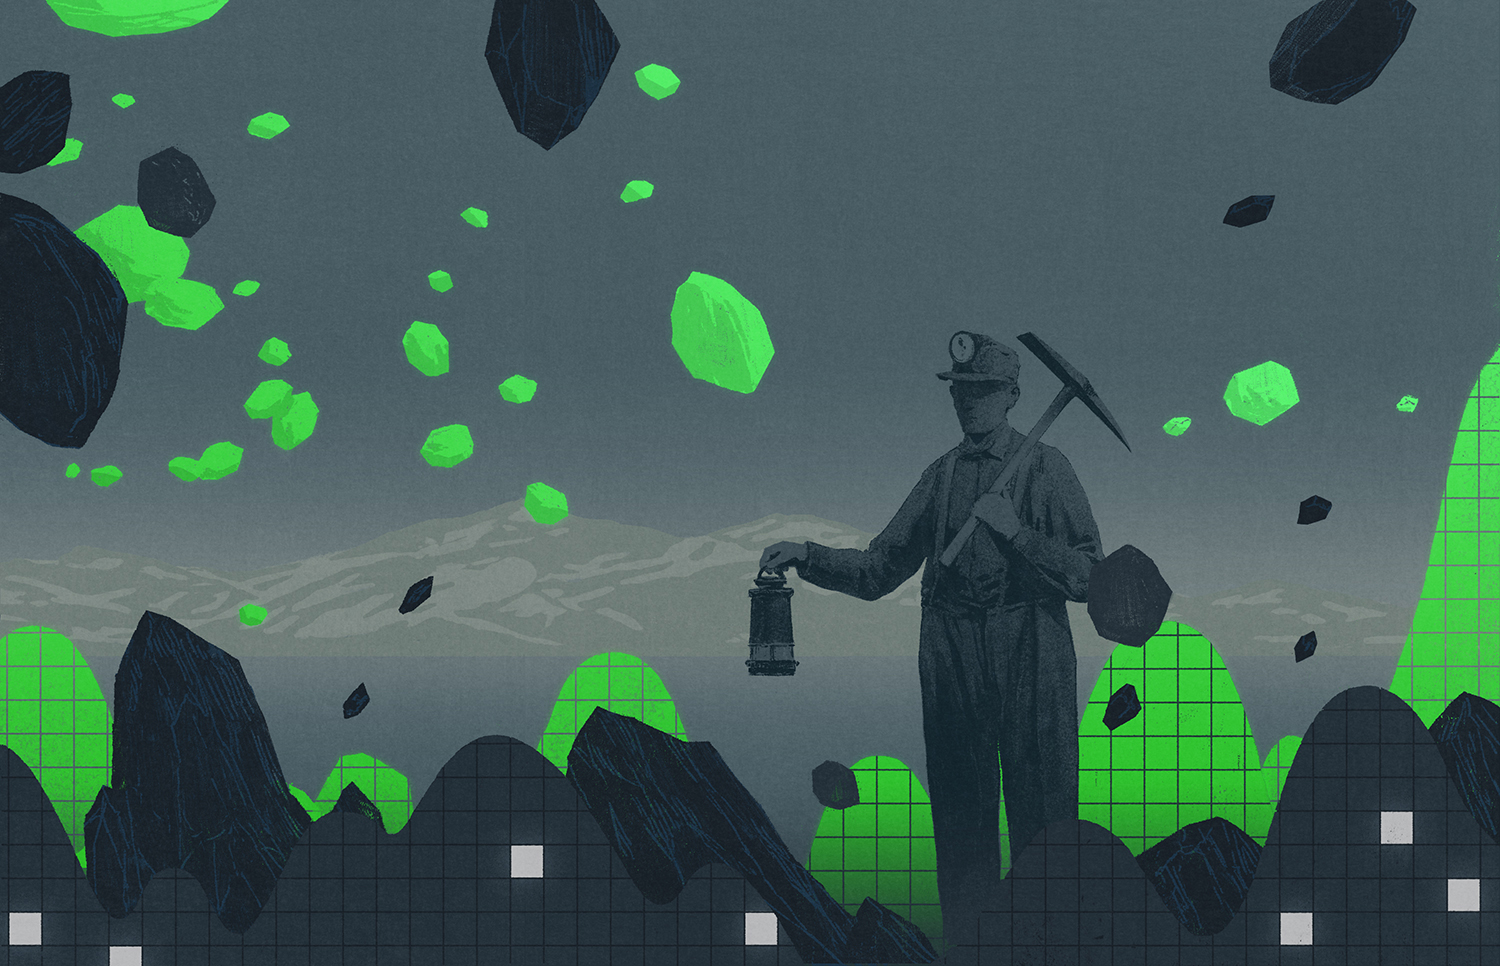 Content moderators are “the coal workers of Silicon Valley,” one Accenture employee told TIME. The dangerous, underpaid work of underground coal mining was the "absolute necessary counterpart" of the clean, safe world above, author George Orwell observed in 1937. (Illustration by Adam Parata for TIME)